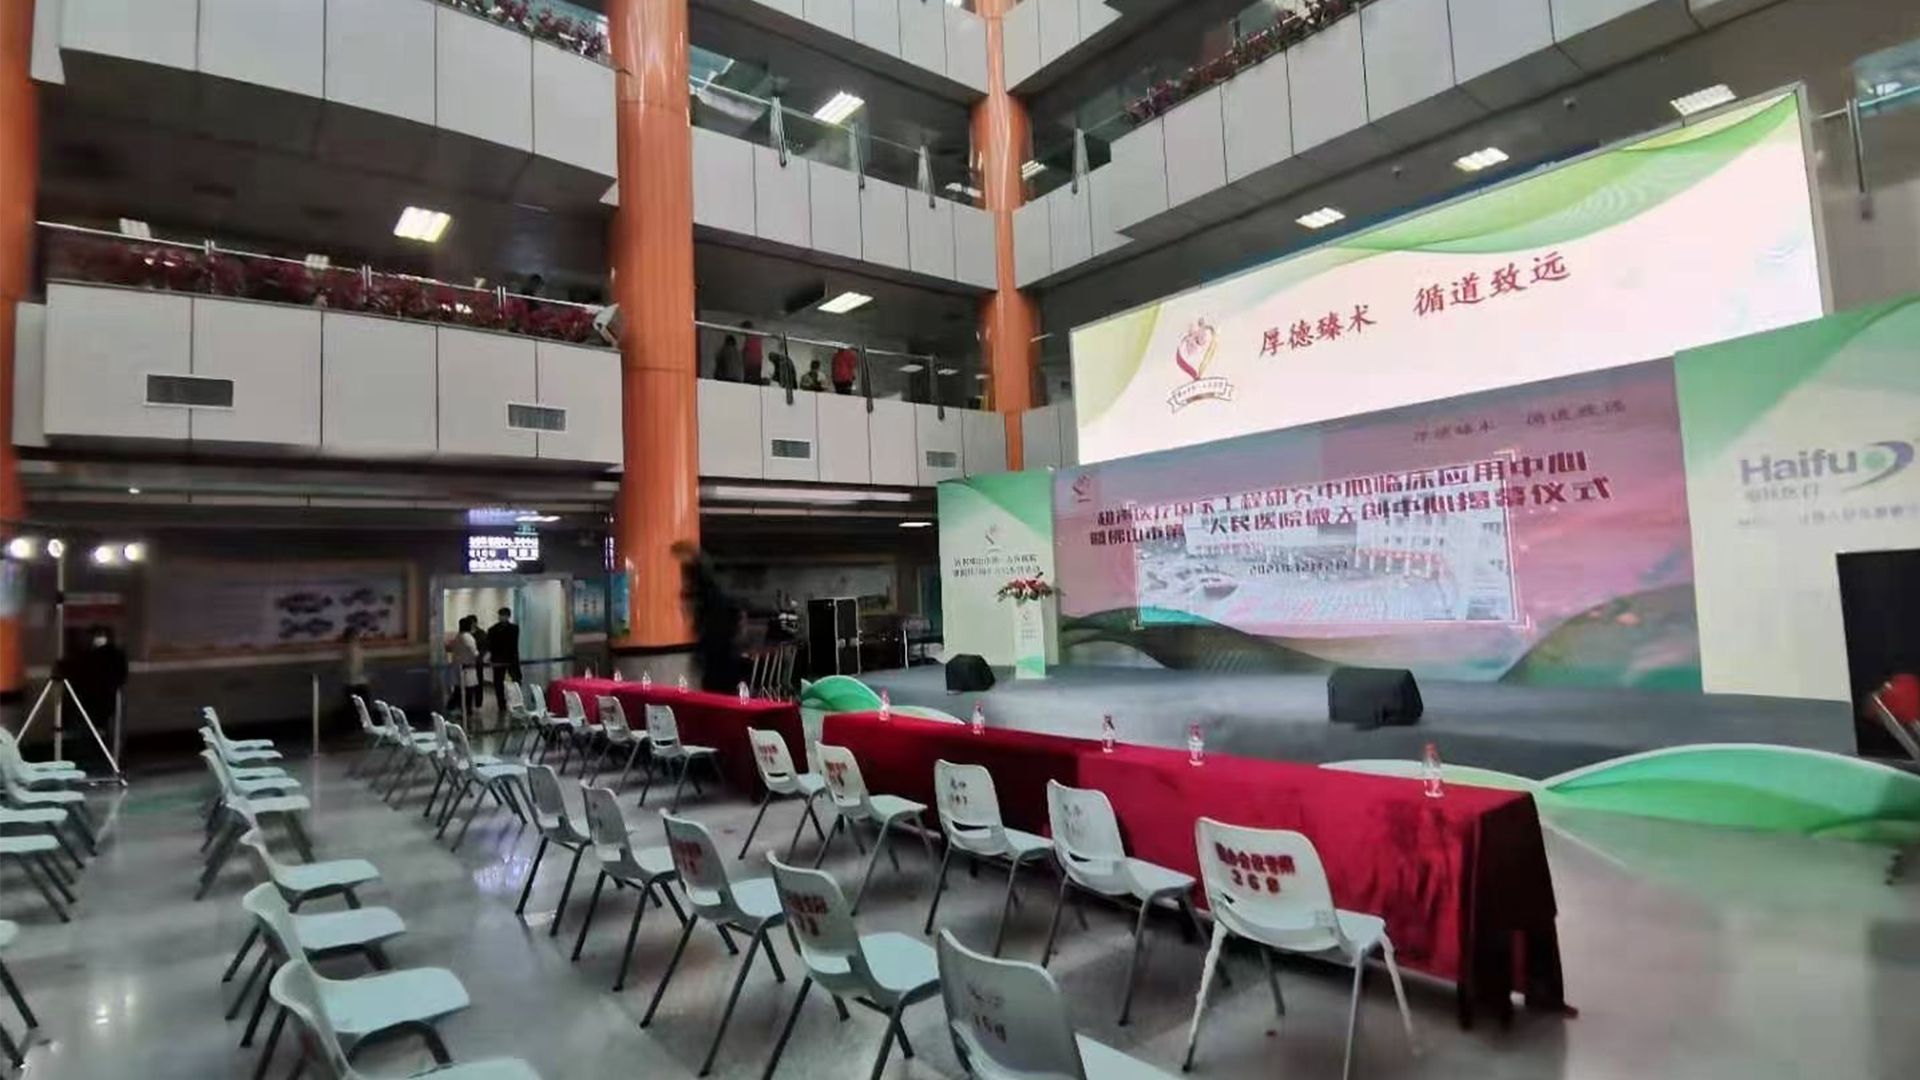 D2_Studio_The_Grand_Opening_Event_of_The_Uterine_Medical_center_in_Guangzhou_Foshan